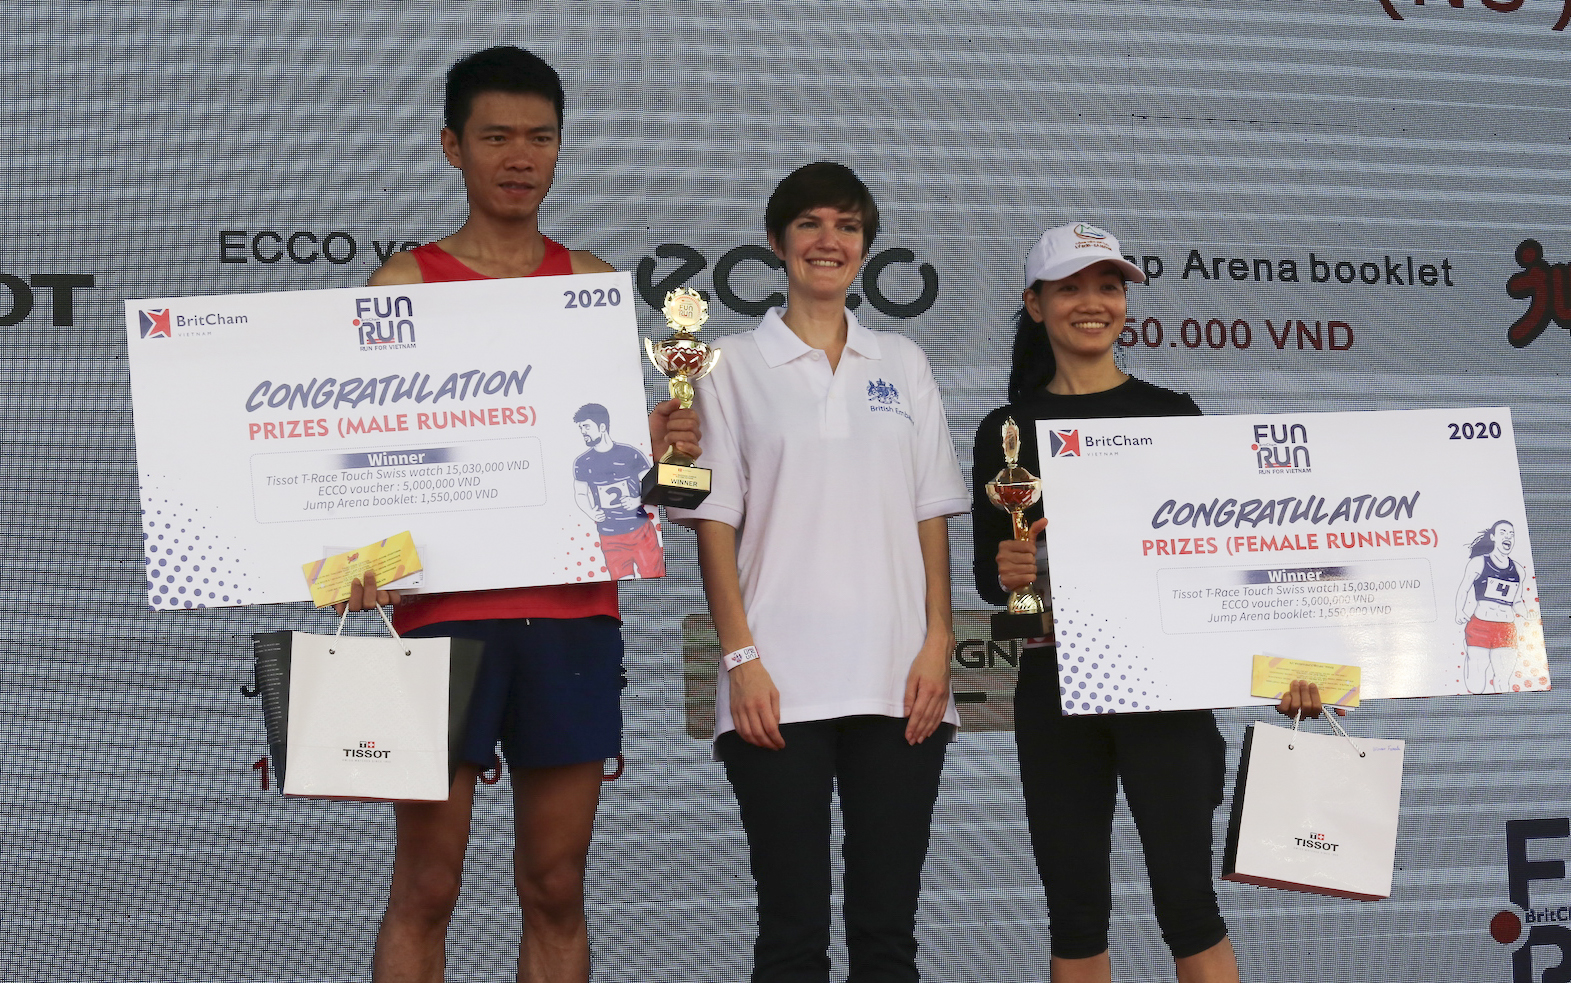 Hua Thuan Long (left) and Nguyen Thao Nguyen received prizes for male and female champions at the 20th BritCham Charity Fun Run in Ho Chi Minh City on November 15,2020. Photo: Duc Khue/ Tuoi Tre